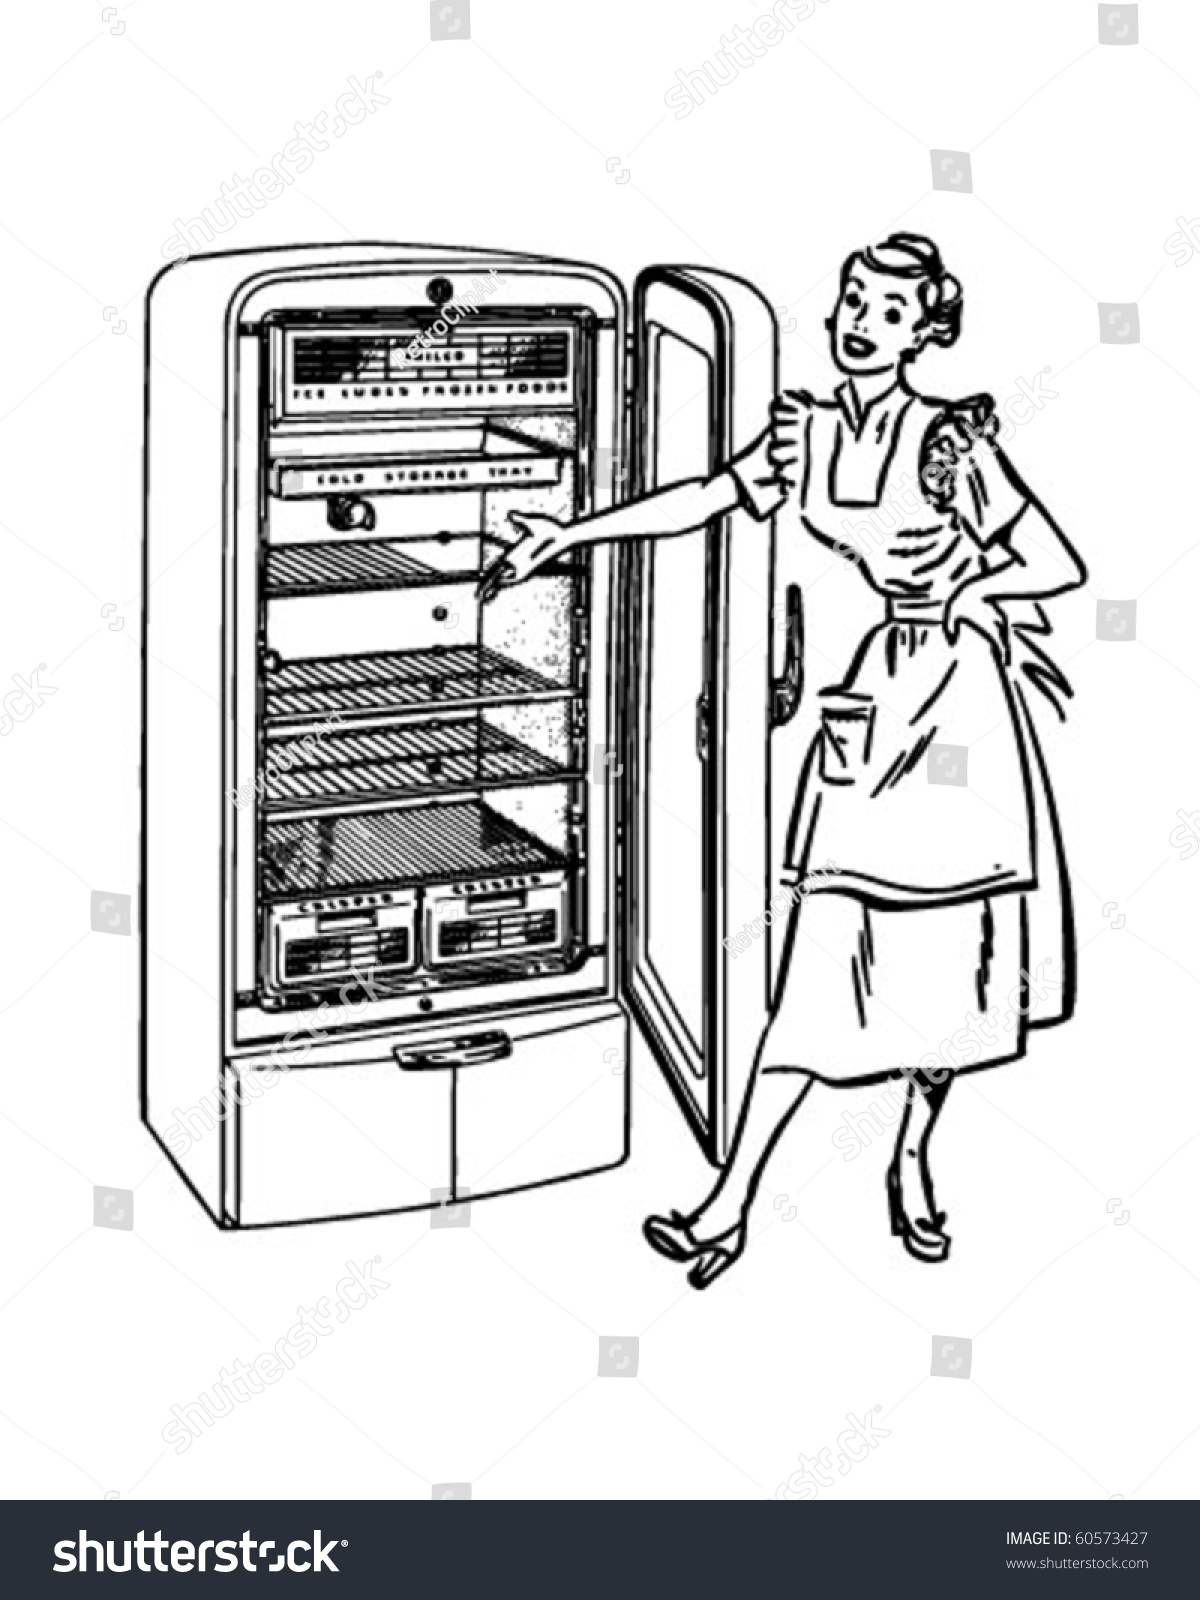 clipart fridge cleaning - photo #48